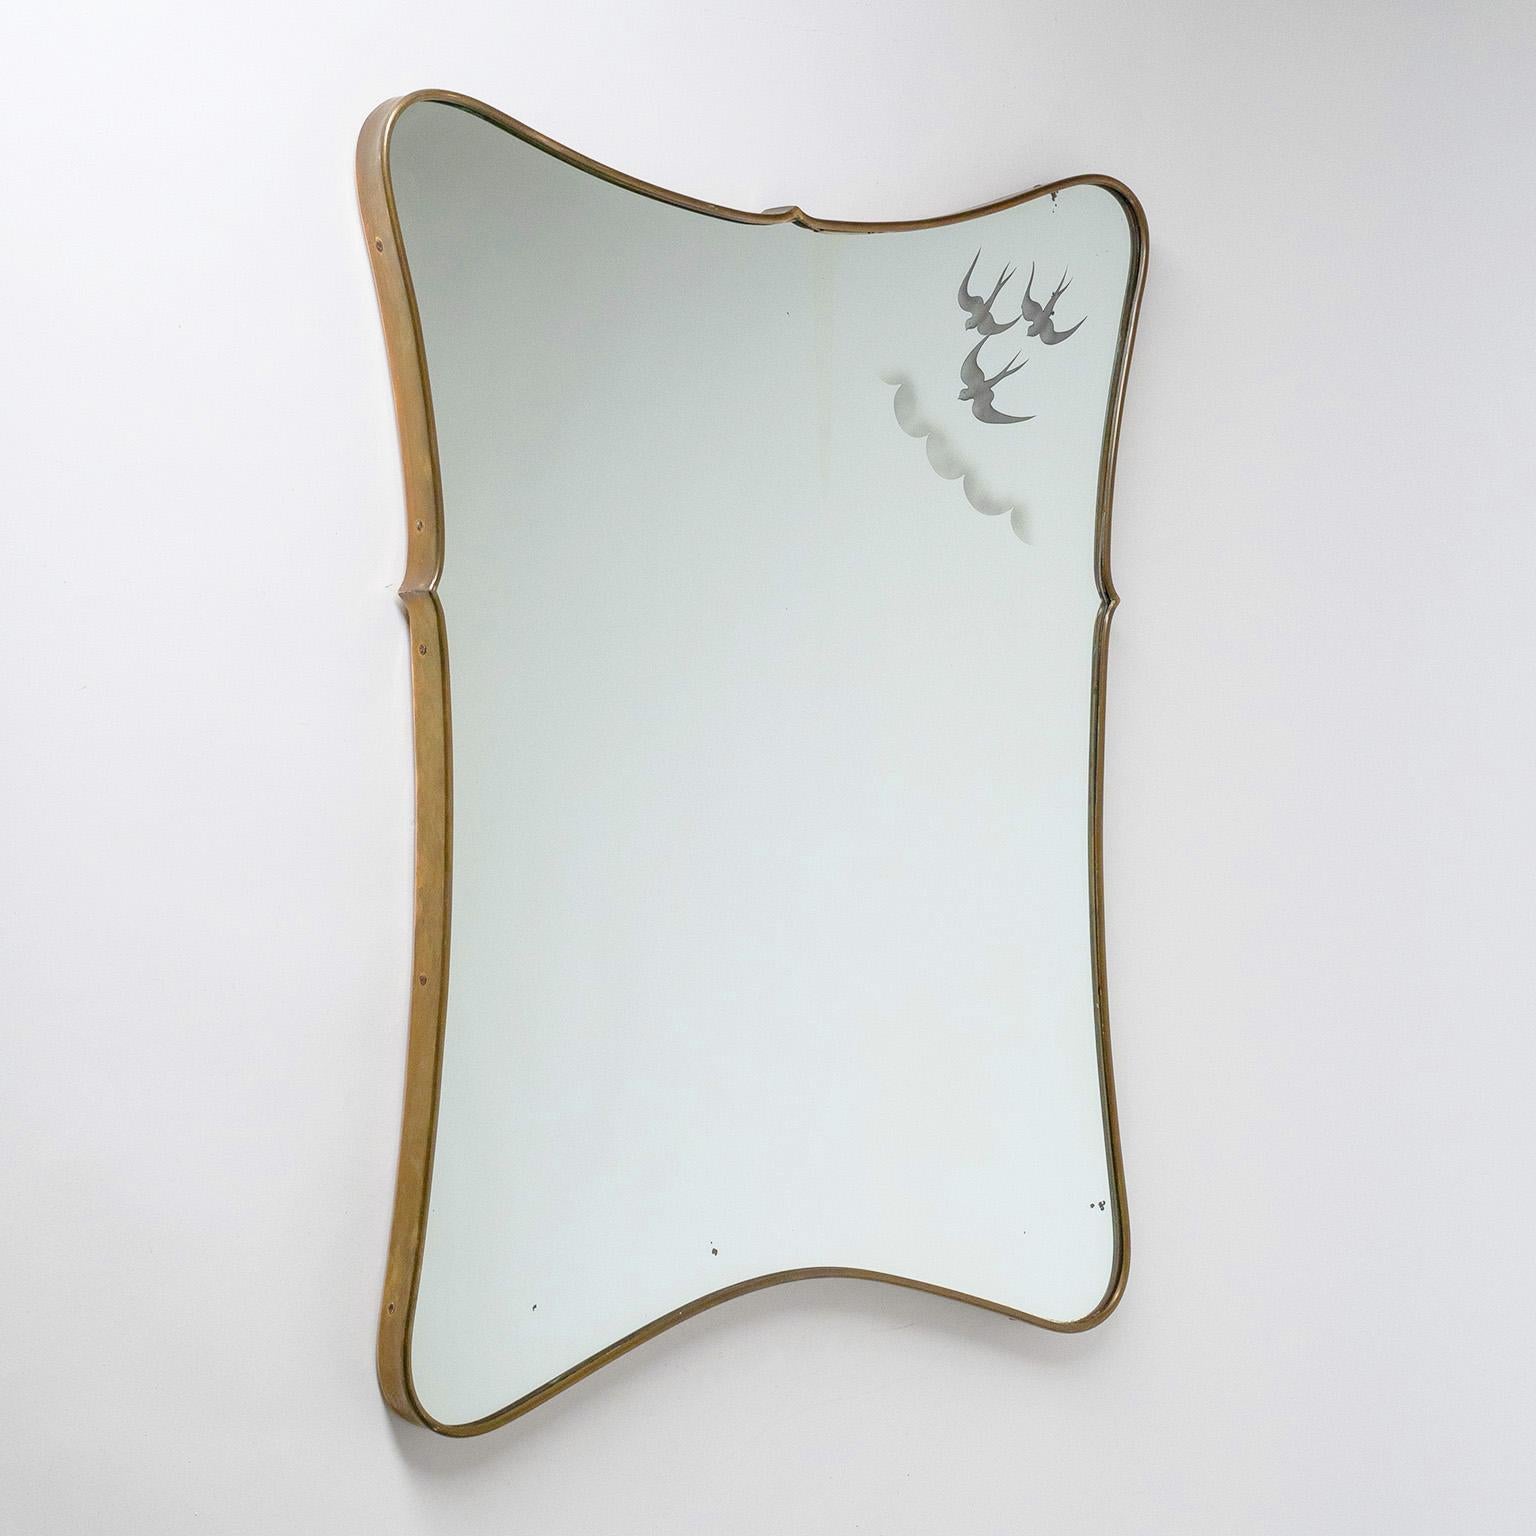 Rare Italian brass mirror from the 1940-1950s. Continuous brass frame with a tapered shape. The mirror has a charming etched or printed decor in the upper right-hand side, depicting three birds in flight amid hints of clouds. Patina on the brass and